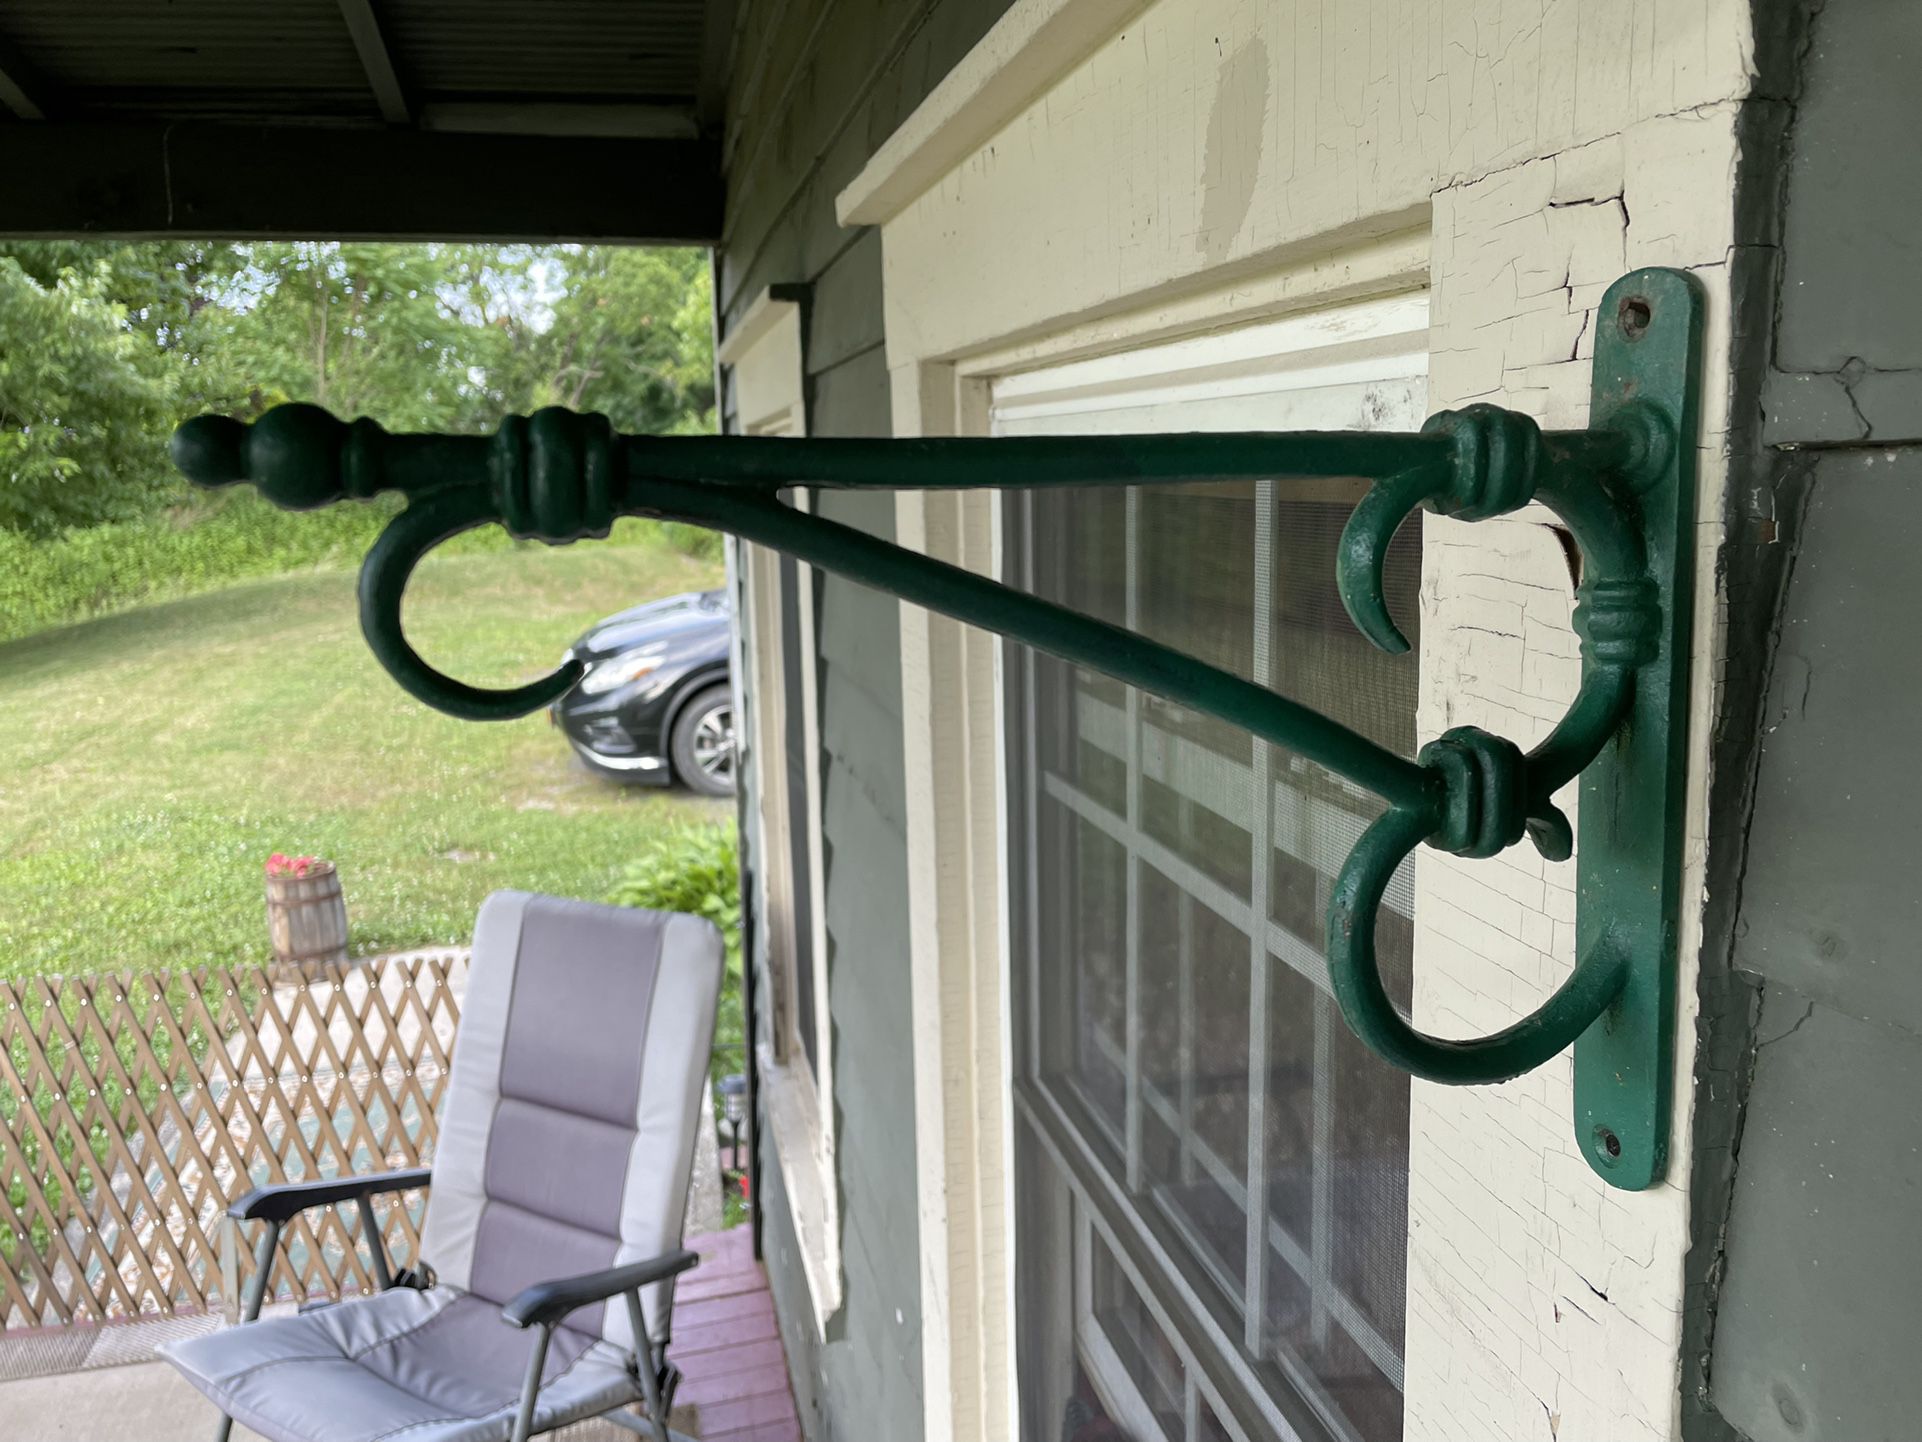 Outdoor sturdy metal plant/sign holder with scrollwork